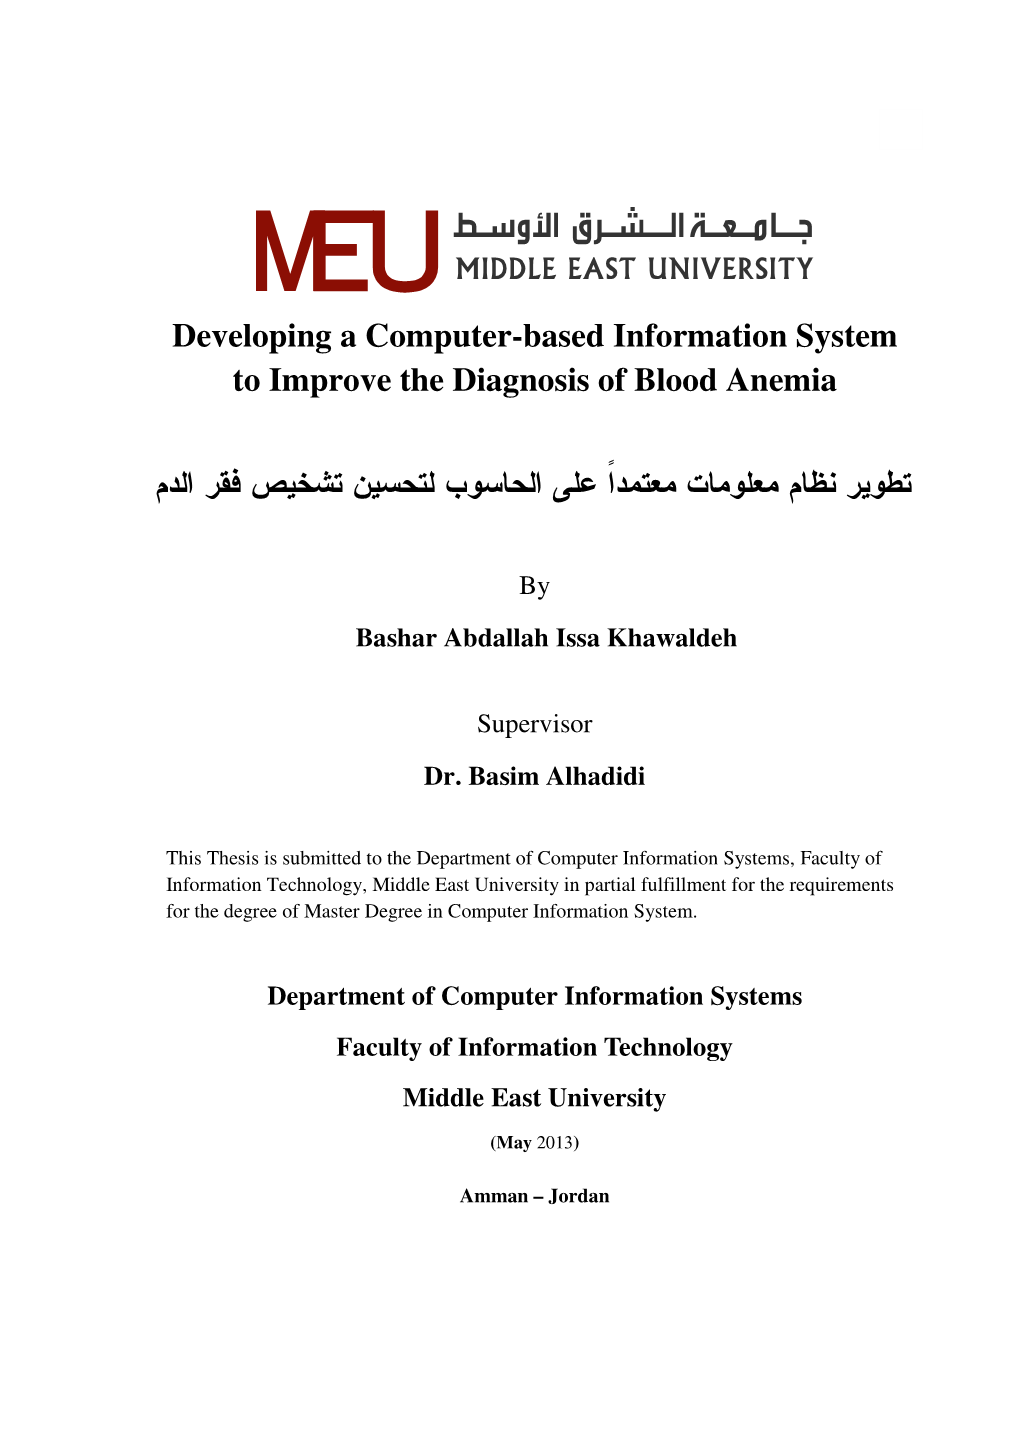 Developing a Computer-Based Information System to Improve the Diagnosis of Blood Anemia